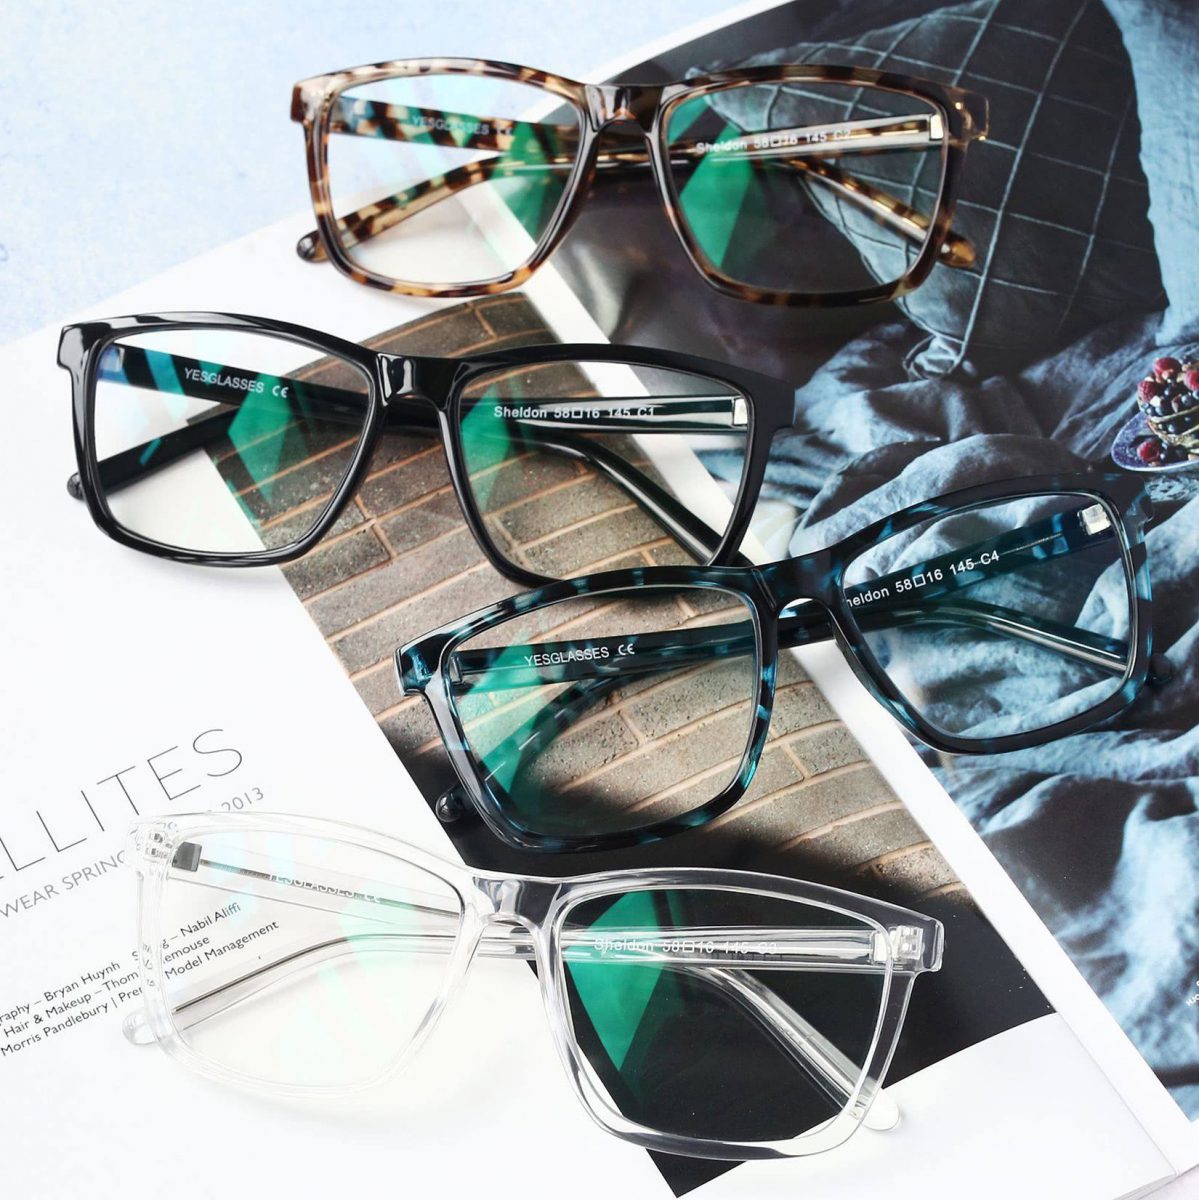 Yesglasses review glass frames - Luxe Digital